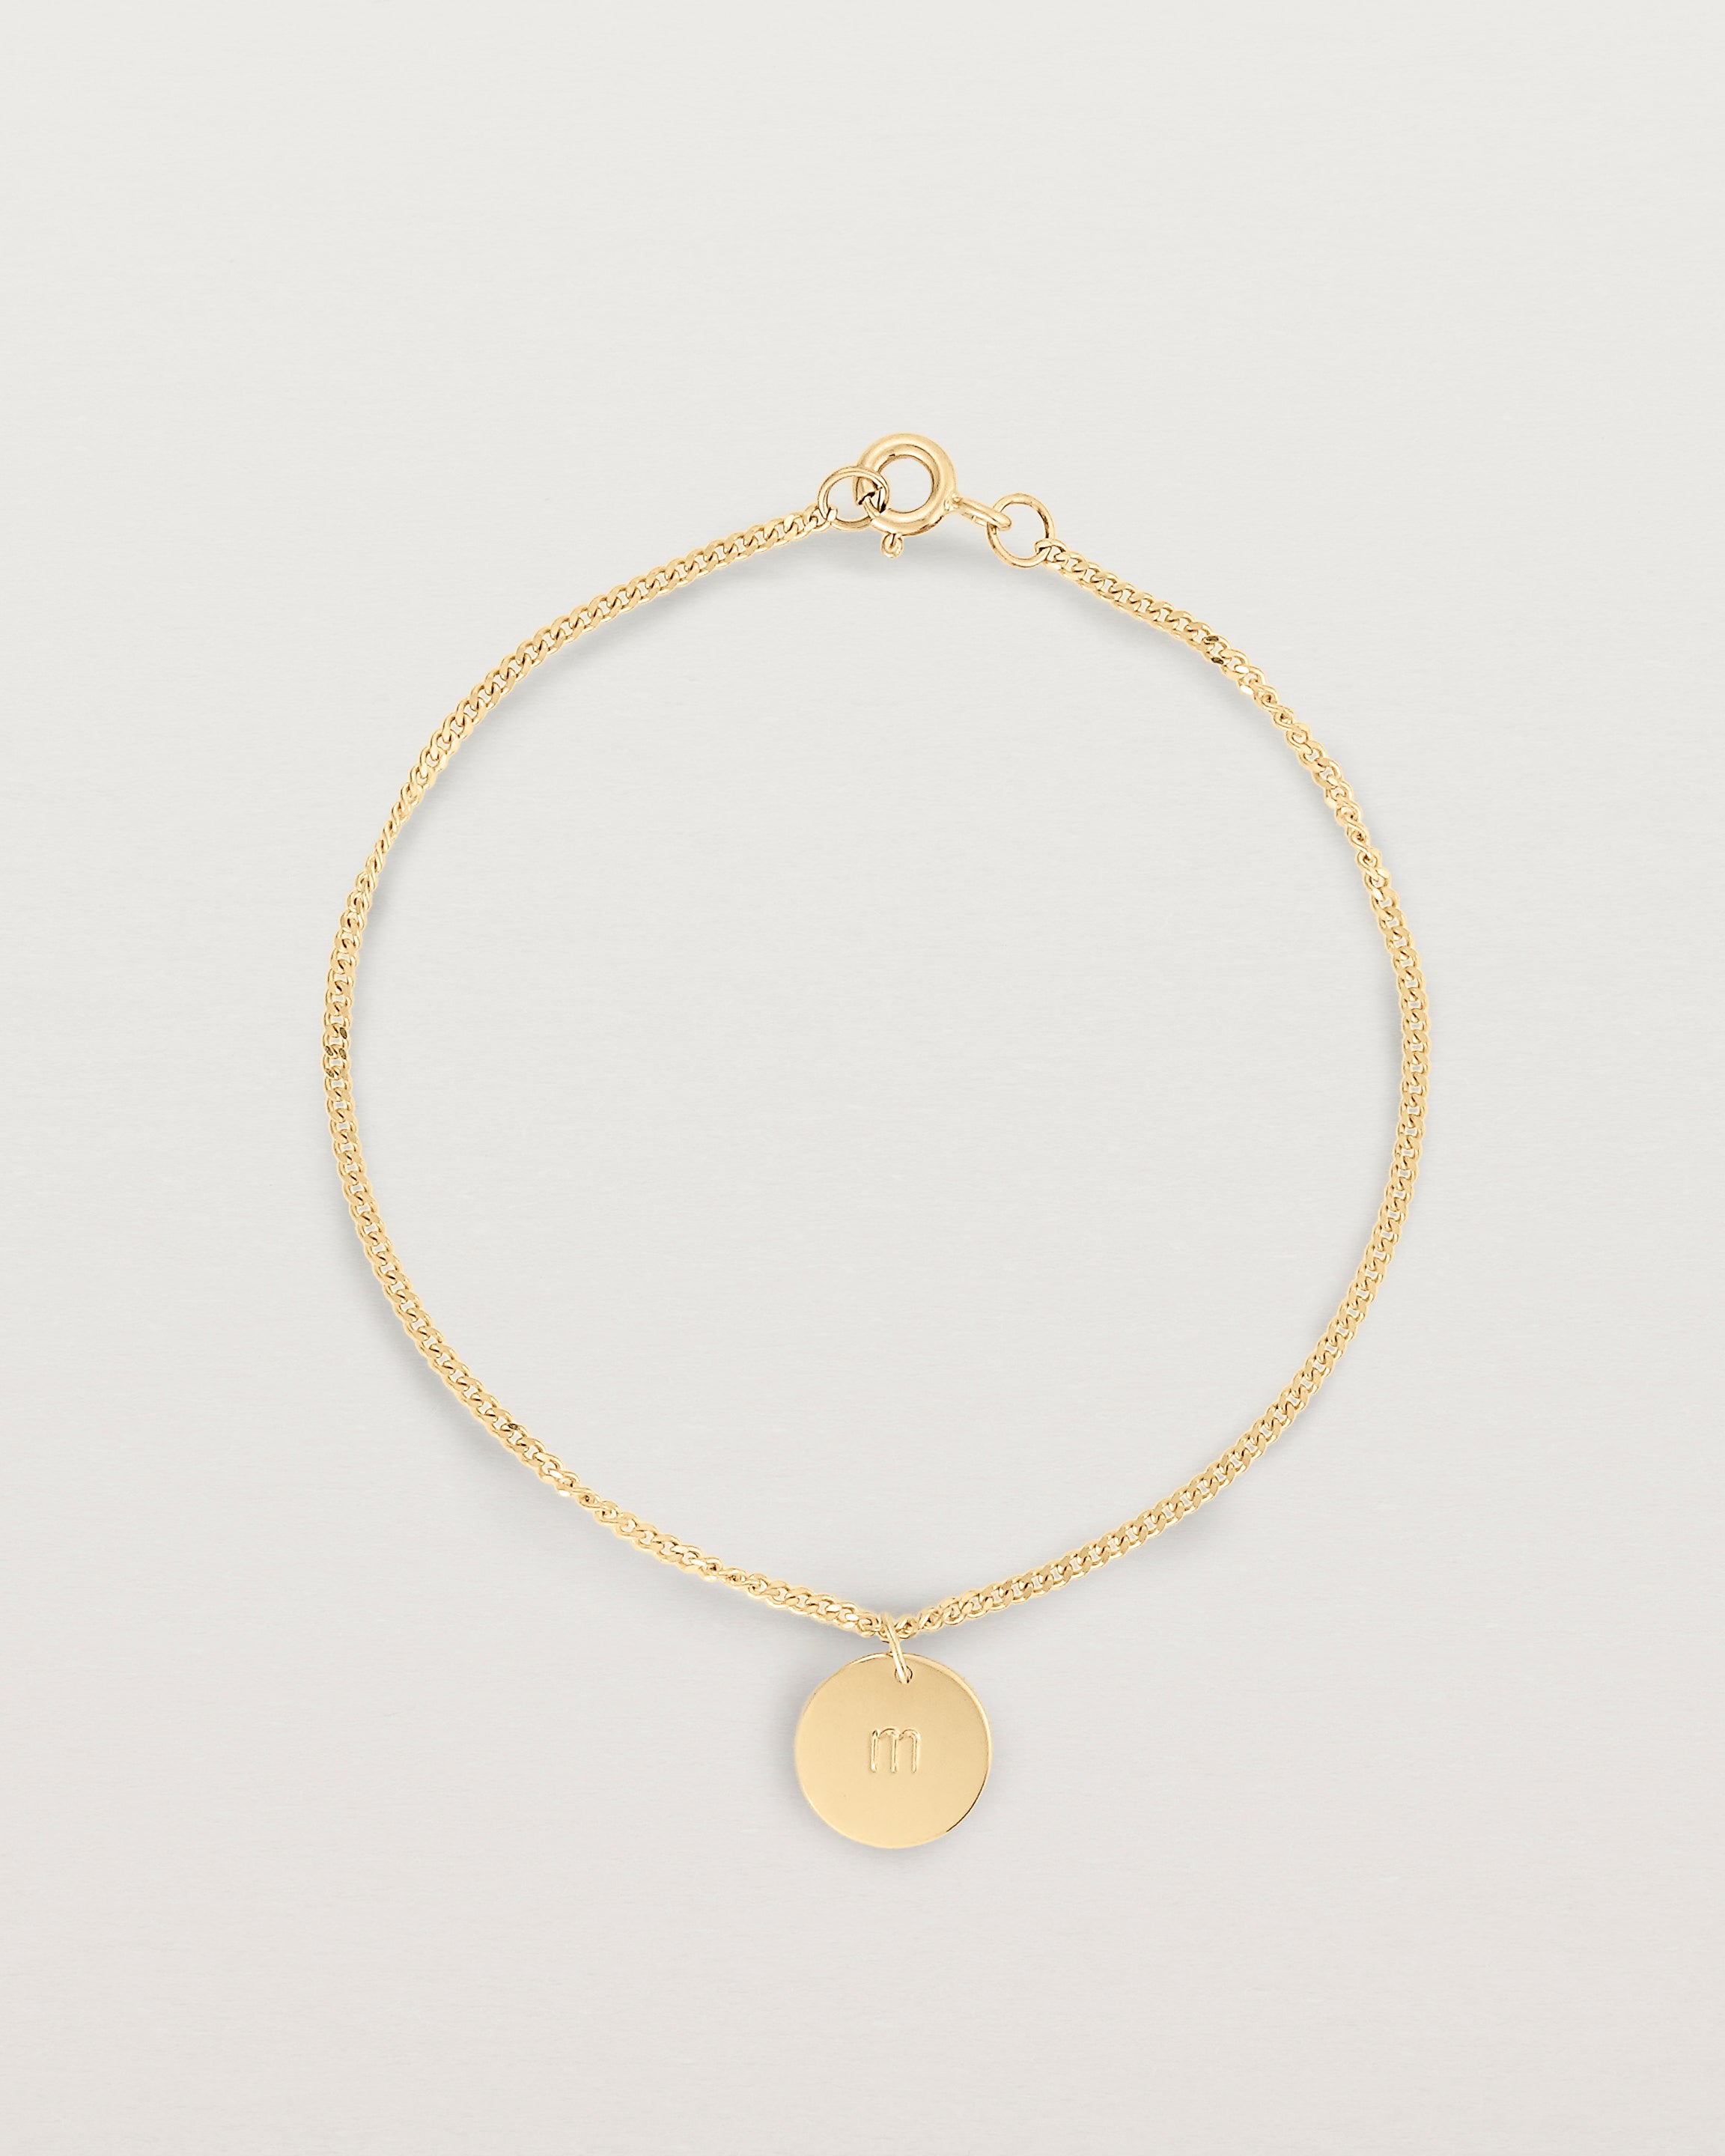 A yellow gold chain bracelet featuring a disc with an engraved letter m